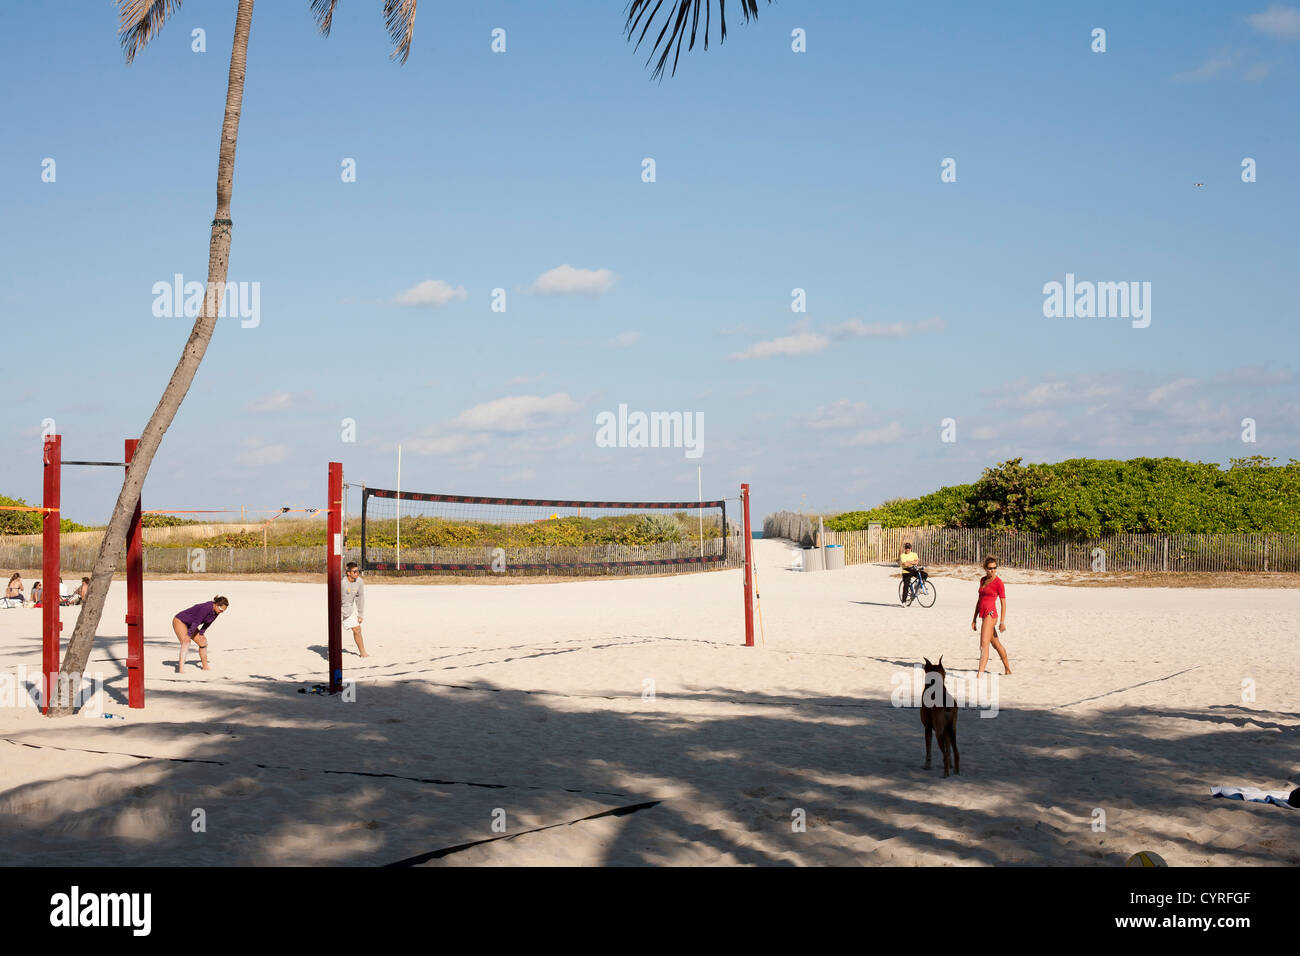 People playing Volley Ball on the sandy esplanade behind the sand dunes along Miami Beach South watched by their pet dog with pointed ears Stock Photo